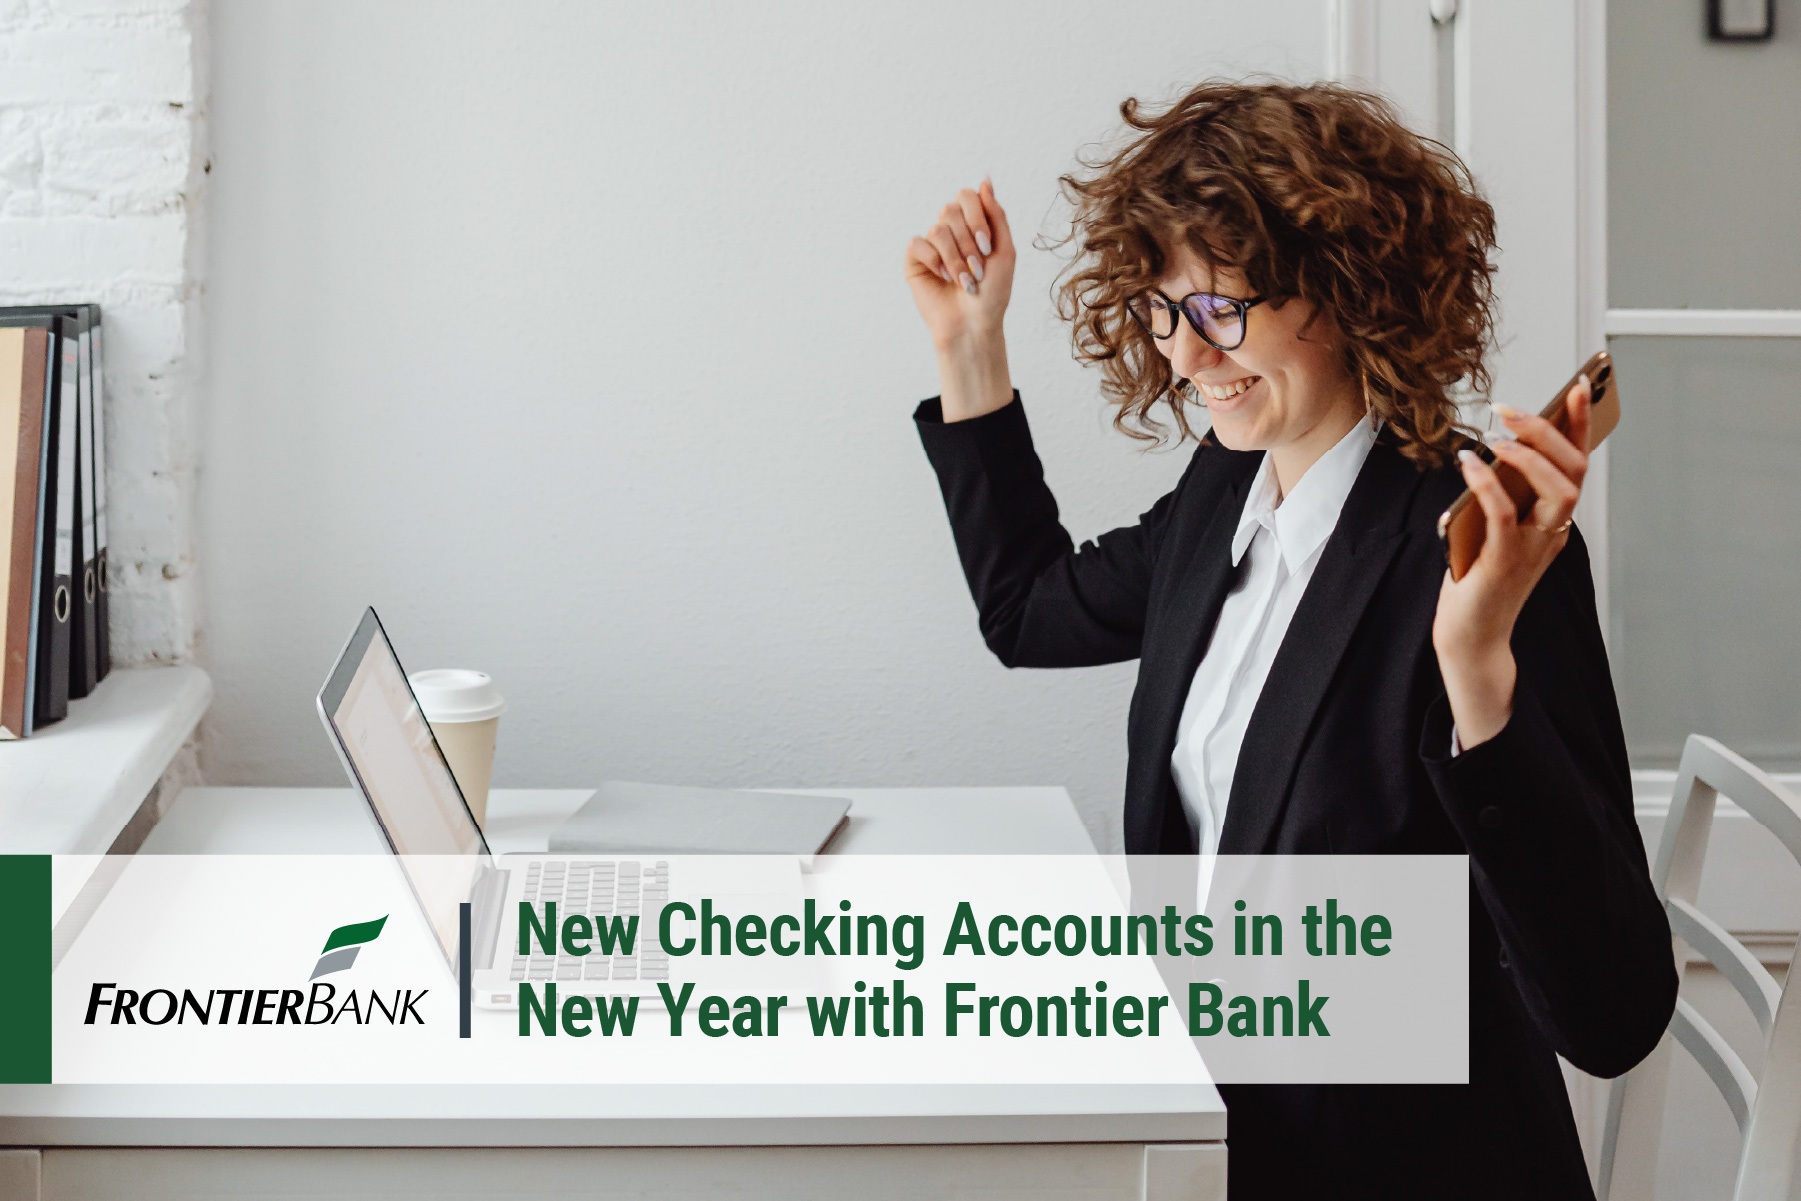 New Checking Accounts in the New Year with Frontier Bank with Graphic